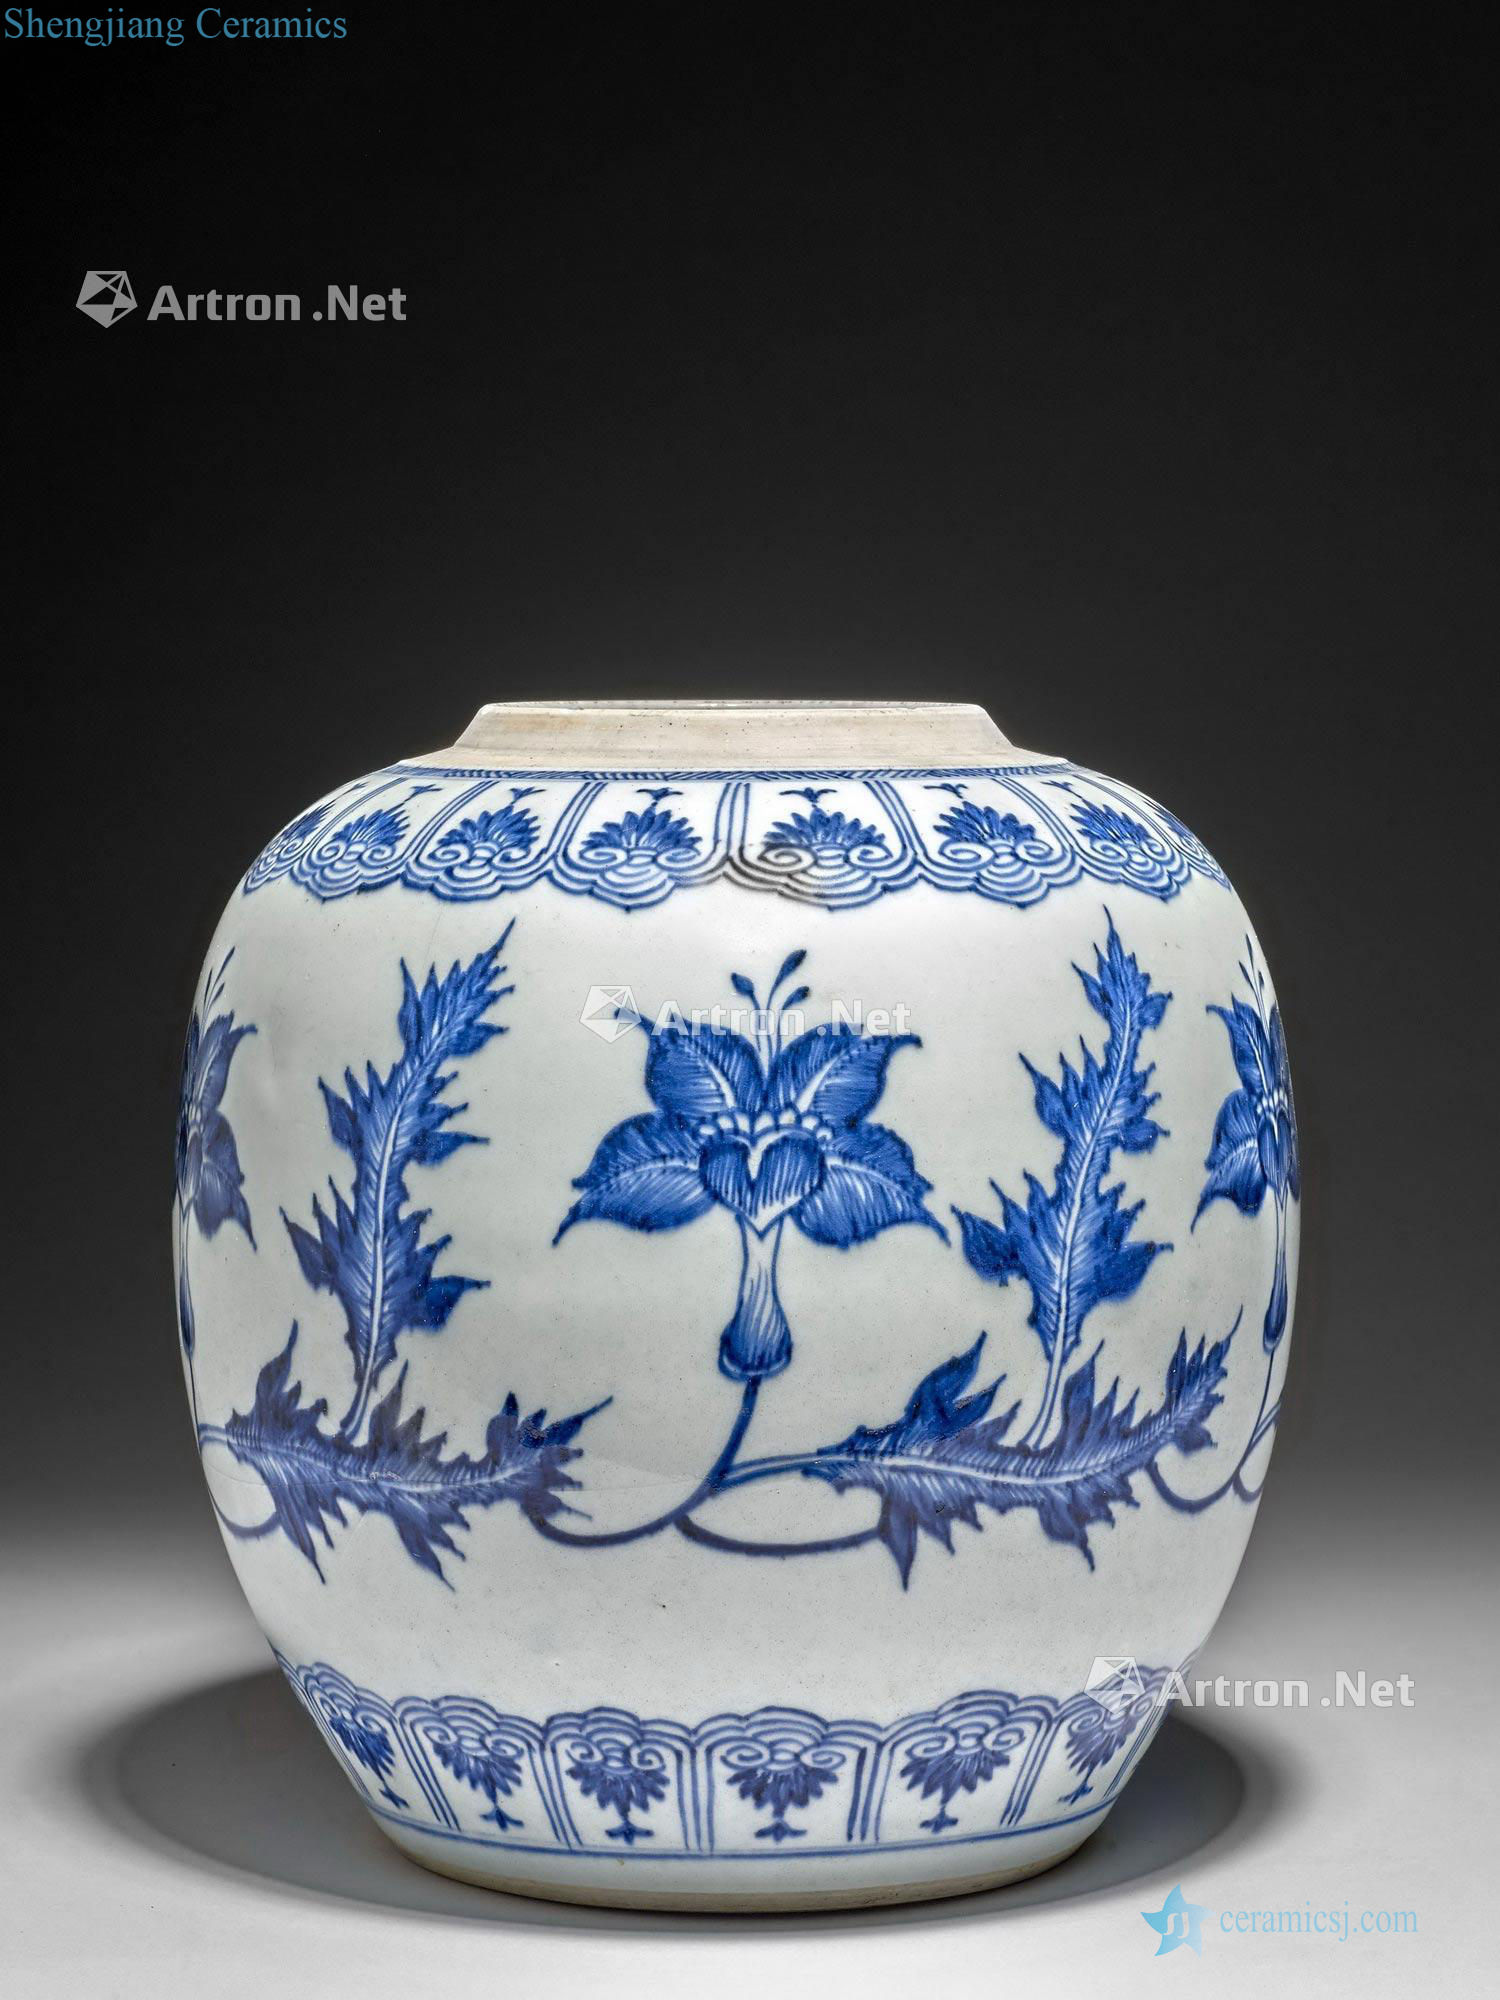 China, the Qing dynasty, Kangxi period (1662-1722), A blue and white porcelain jar